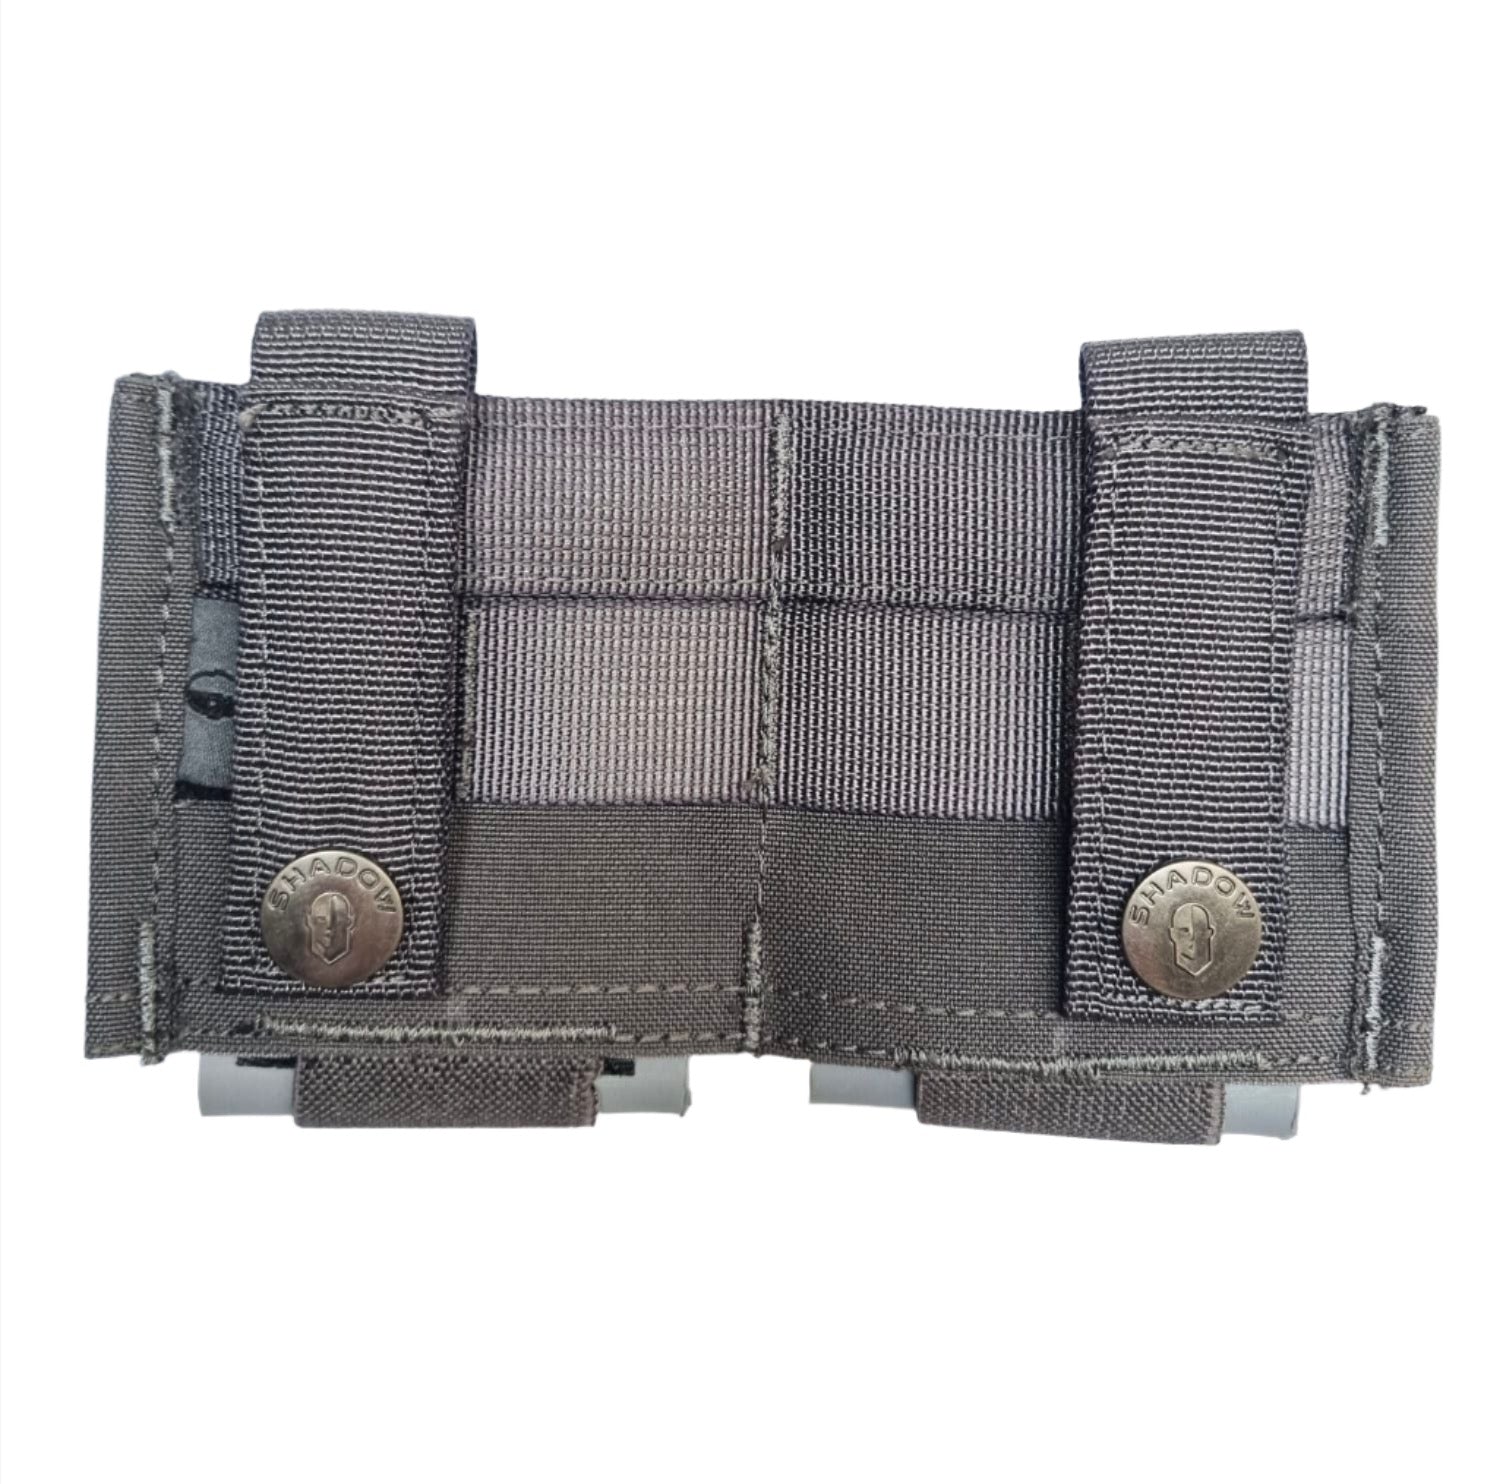 SHE-23032 GRIPTAC DOUBLE M4/M16  MAG POUCH SILVER GREY